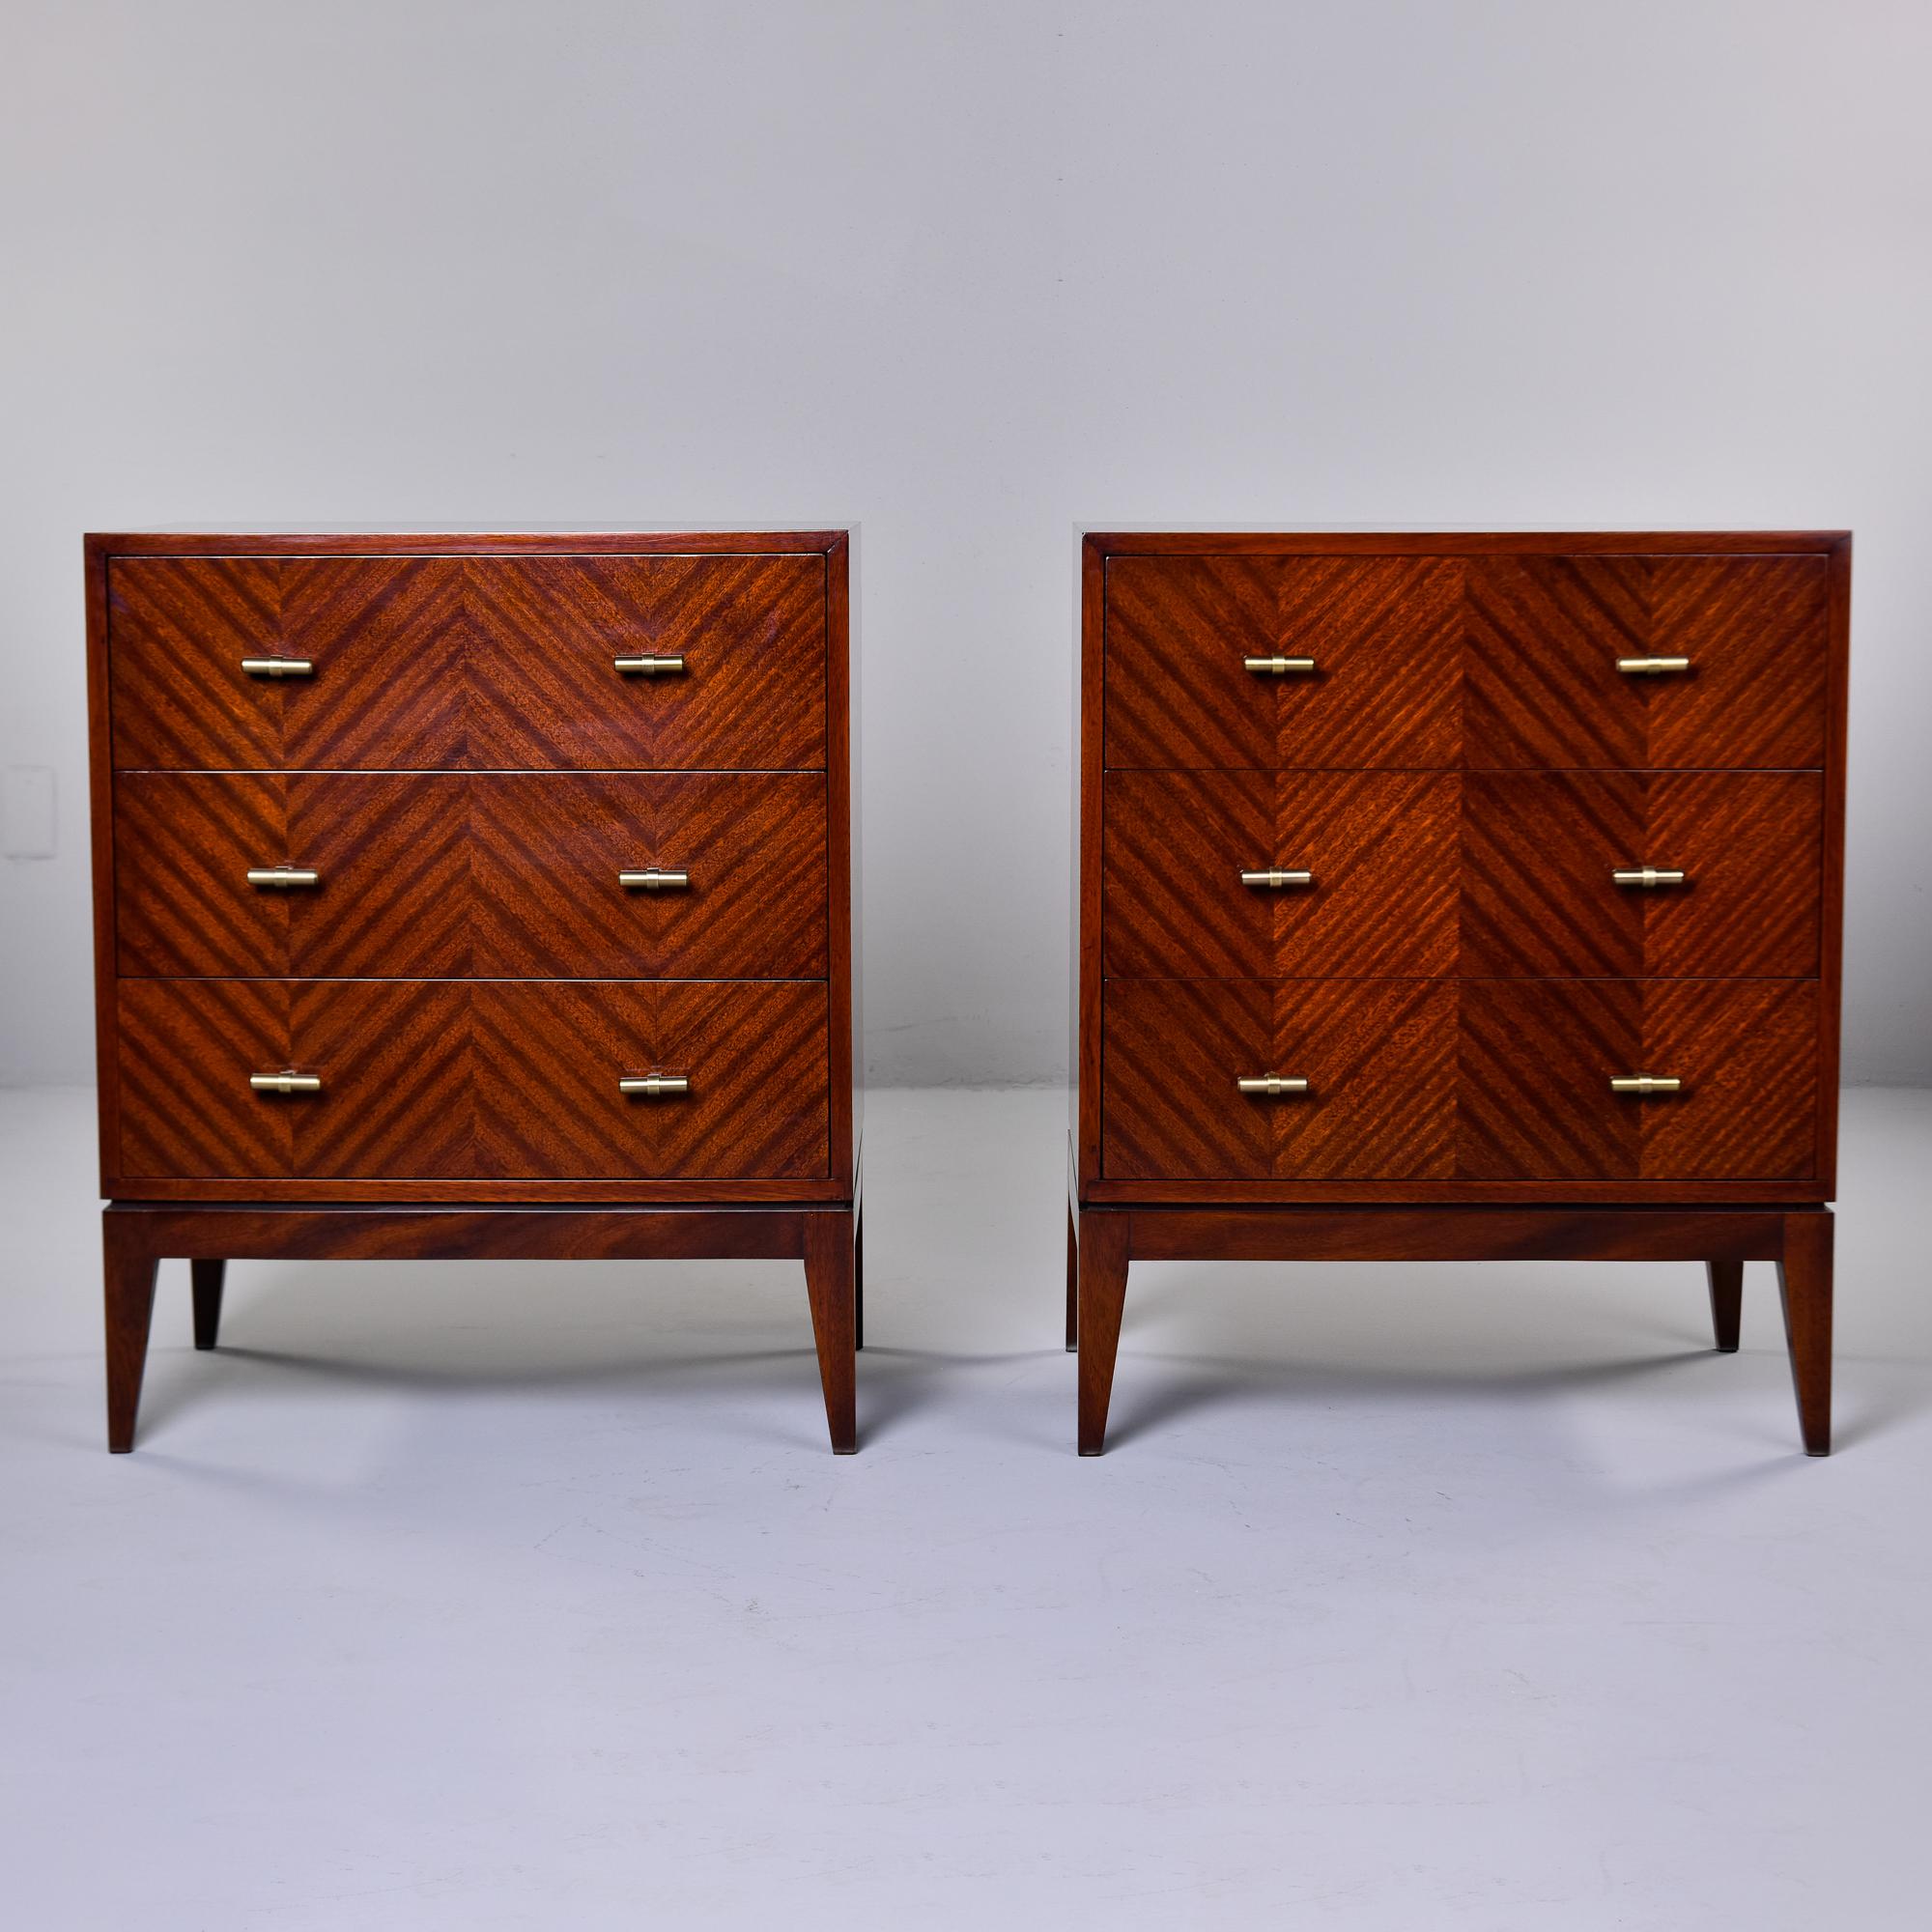 New and custom made for us in England, this pair of three drawer chests is made of walnut. Veneer fronts have subtle herringbone pattern. Three functional drawers. Perfect to use for bedside or side tables. Sold and priced as a pair. 